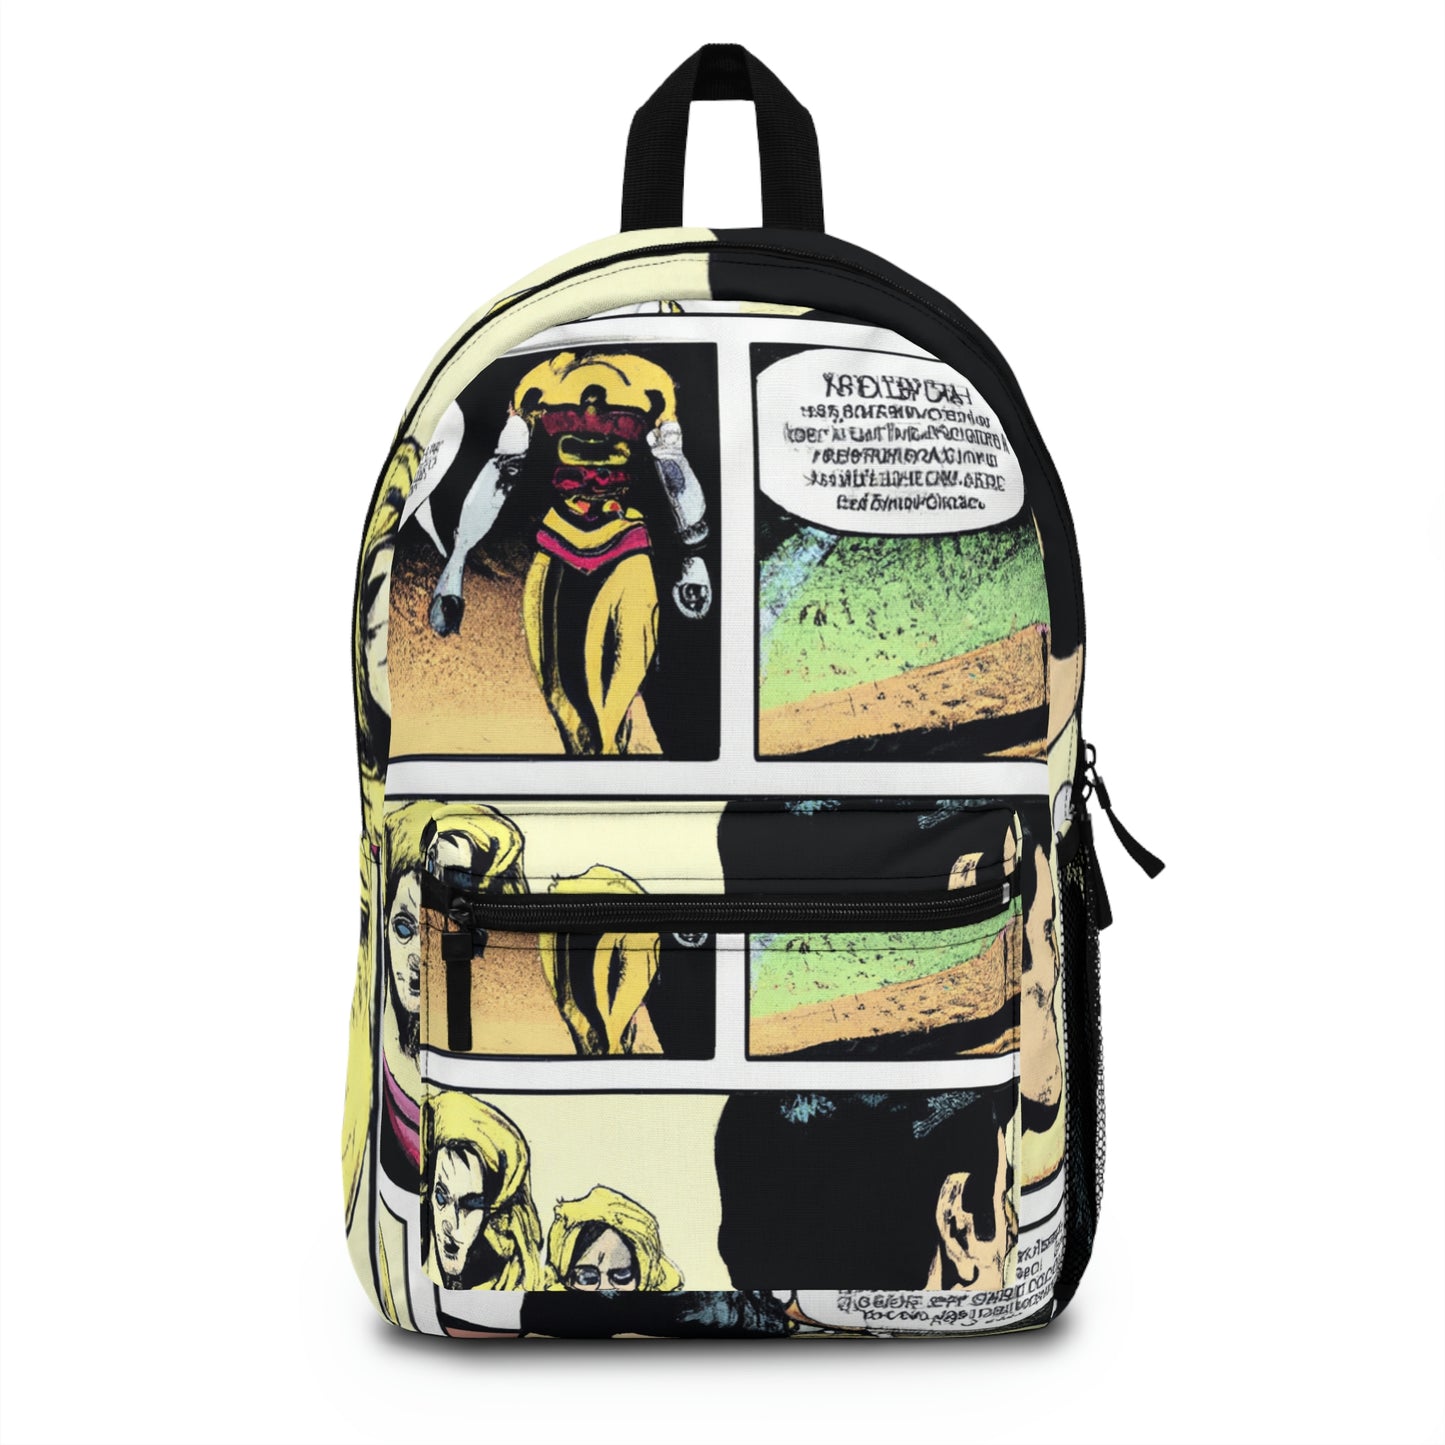 Captain Spectra. - Comic Book Backpack